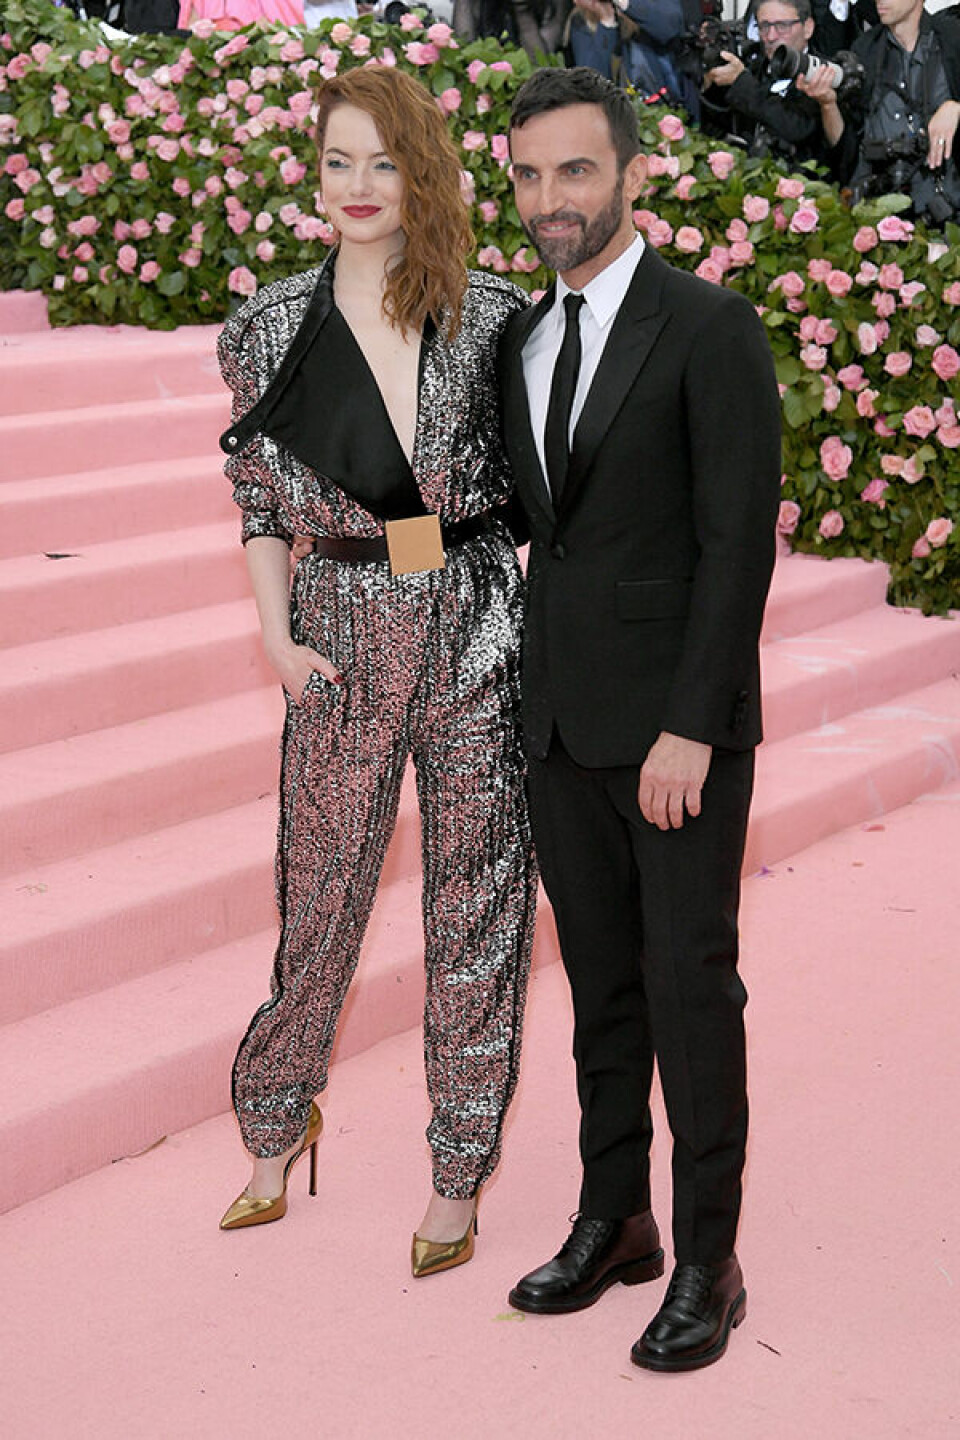 NEW YORK, NEW YORK – MAY 06: Emma Stone and Nicolas Ghesquière attend The 2019 Met Gala Celebrating Camp: Notes on Fashion at Metropolitan Museum of Art on May 06, 2019 in New York City. (Photo by Neilson Barnard/Getty Images)